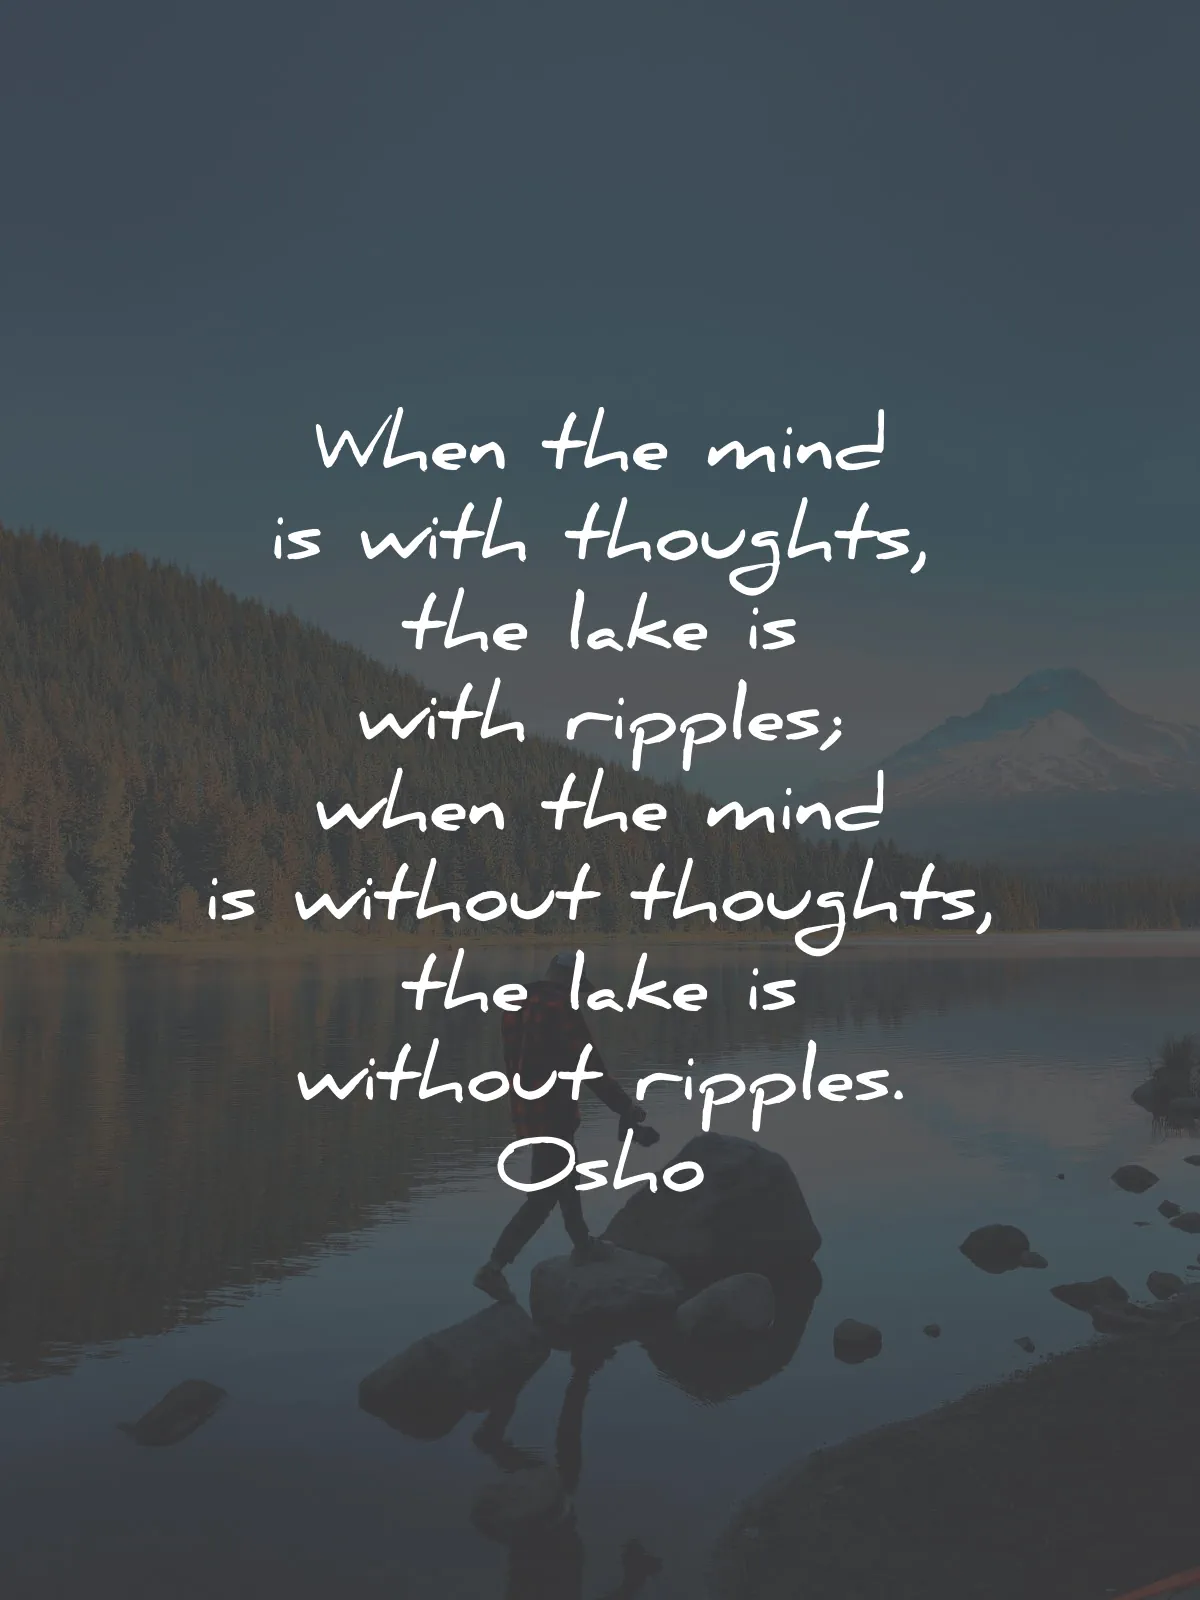 osho quotes mind with thoughts lake ripples wisdom